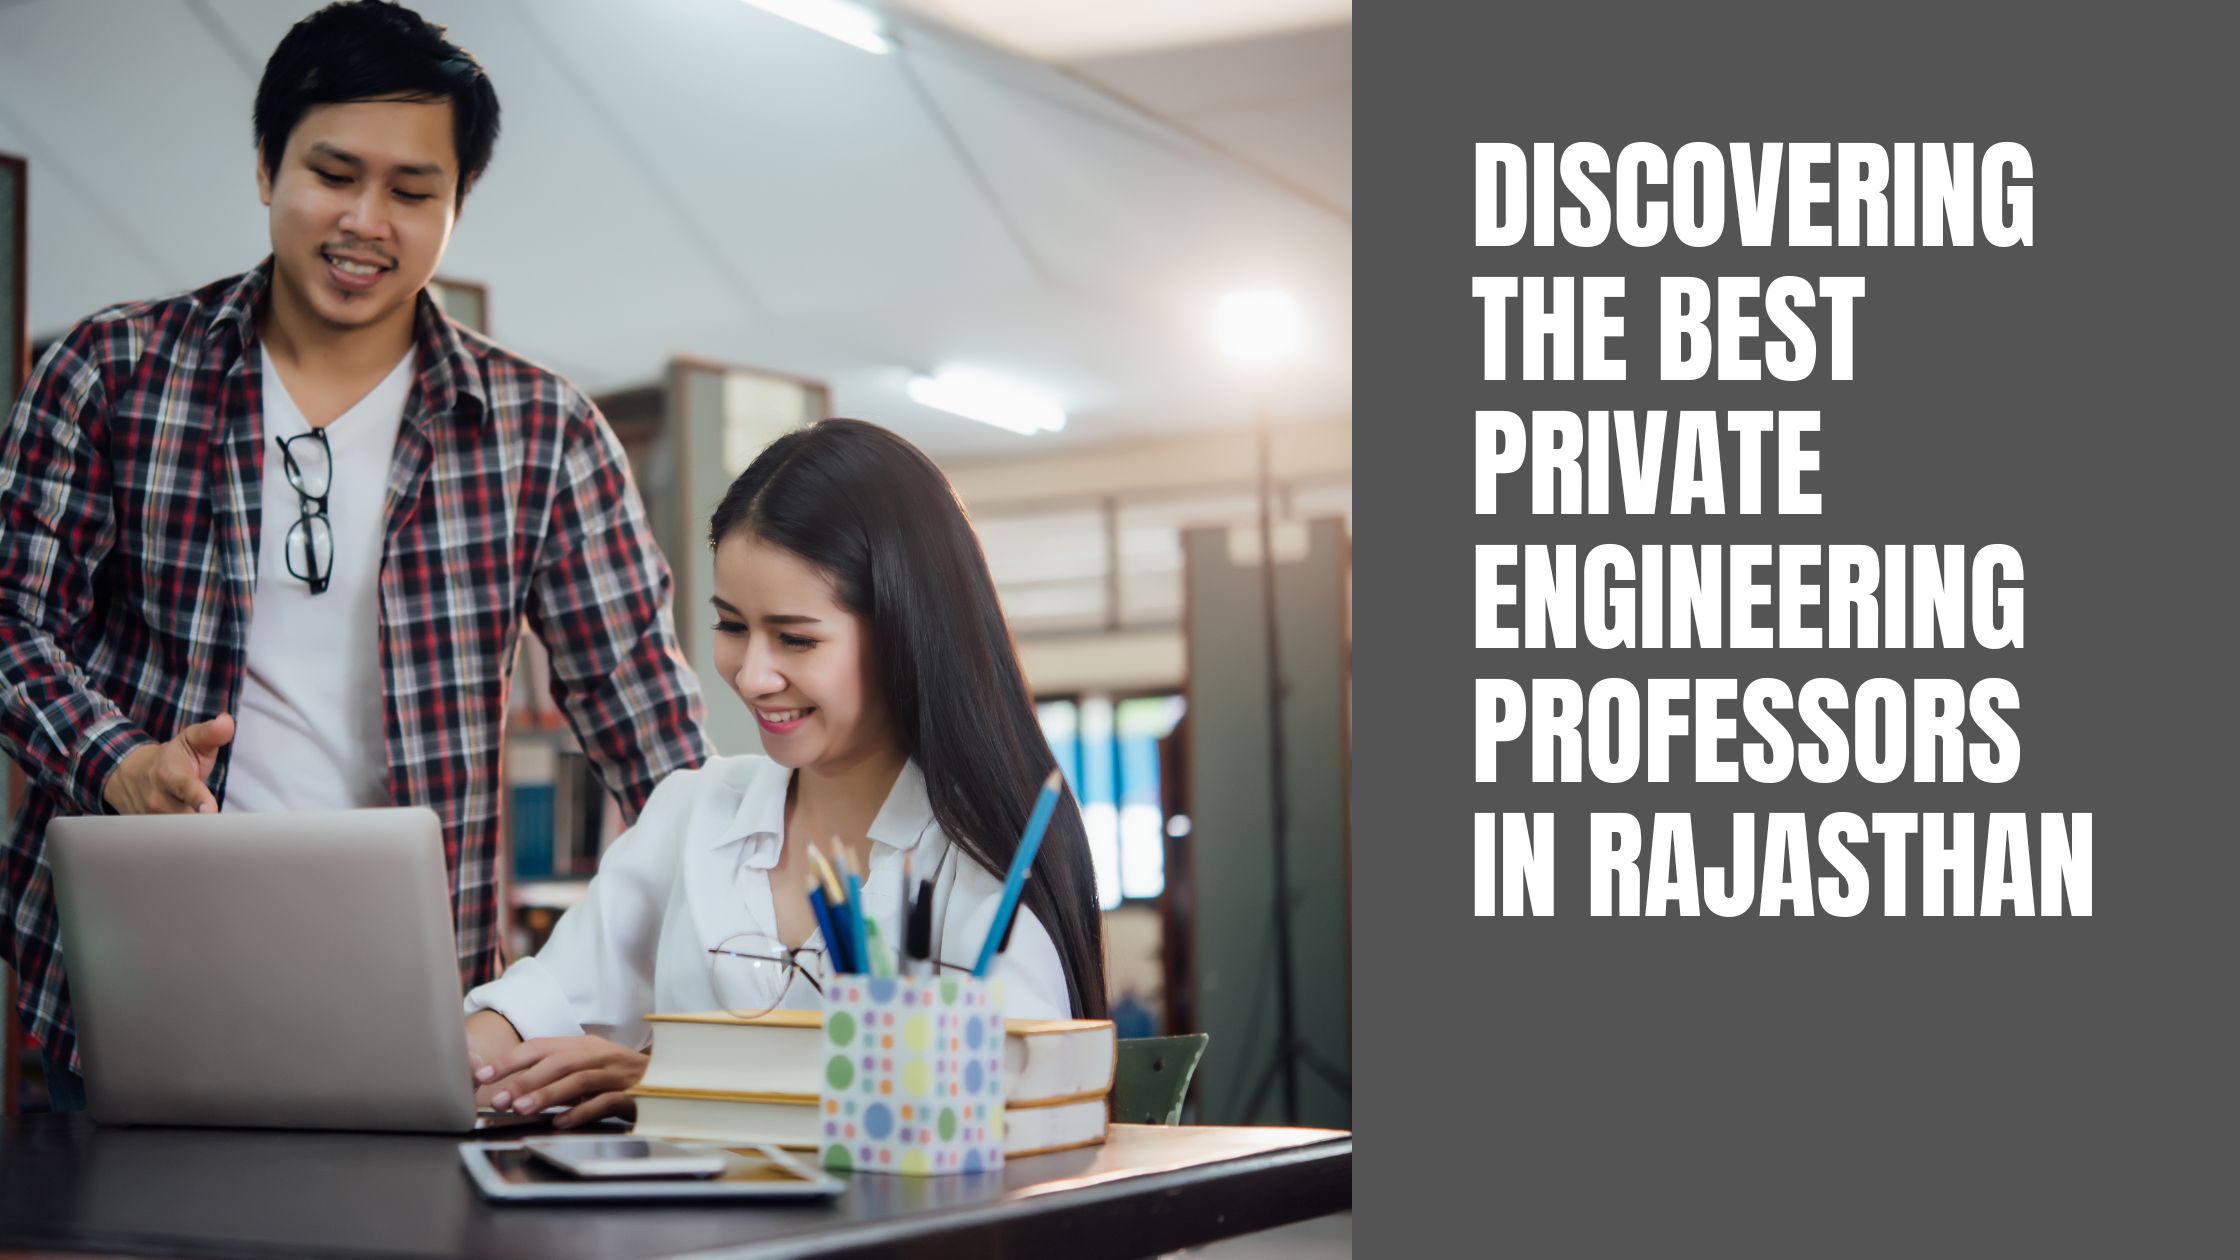 Discovering the Best Private Engineering Professors in Rajasthan